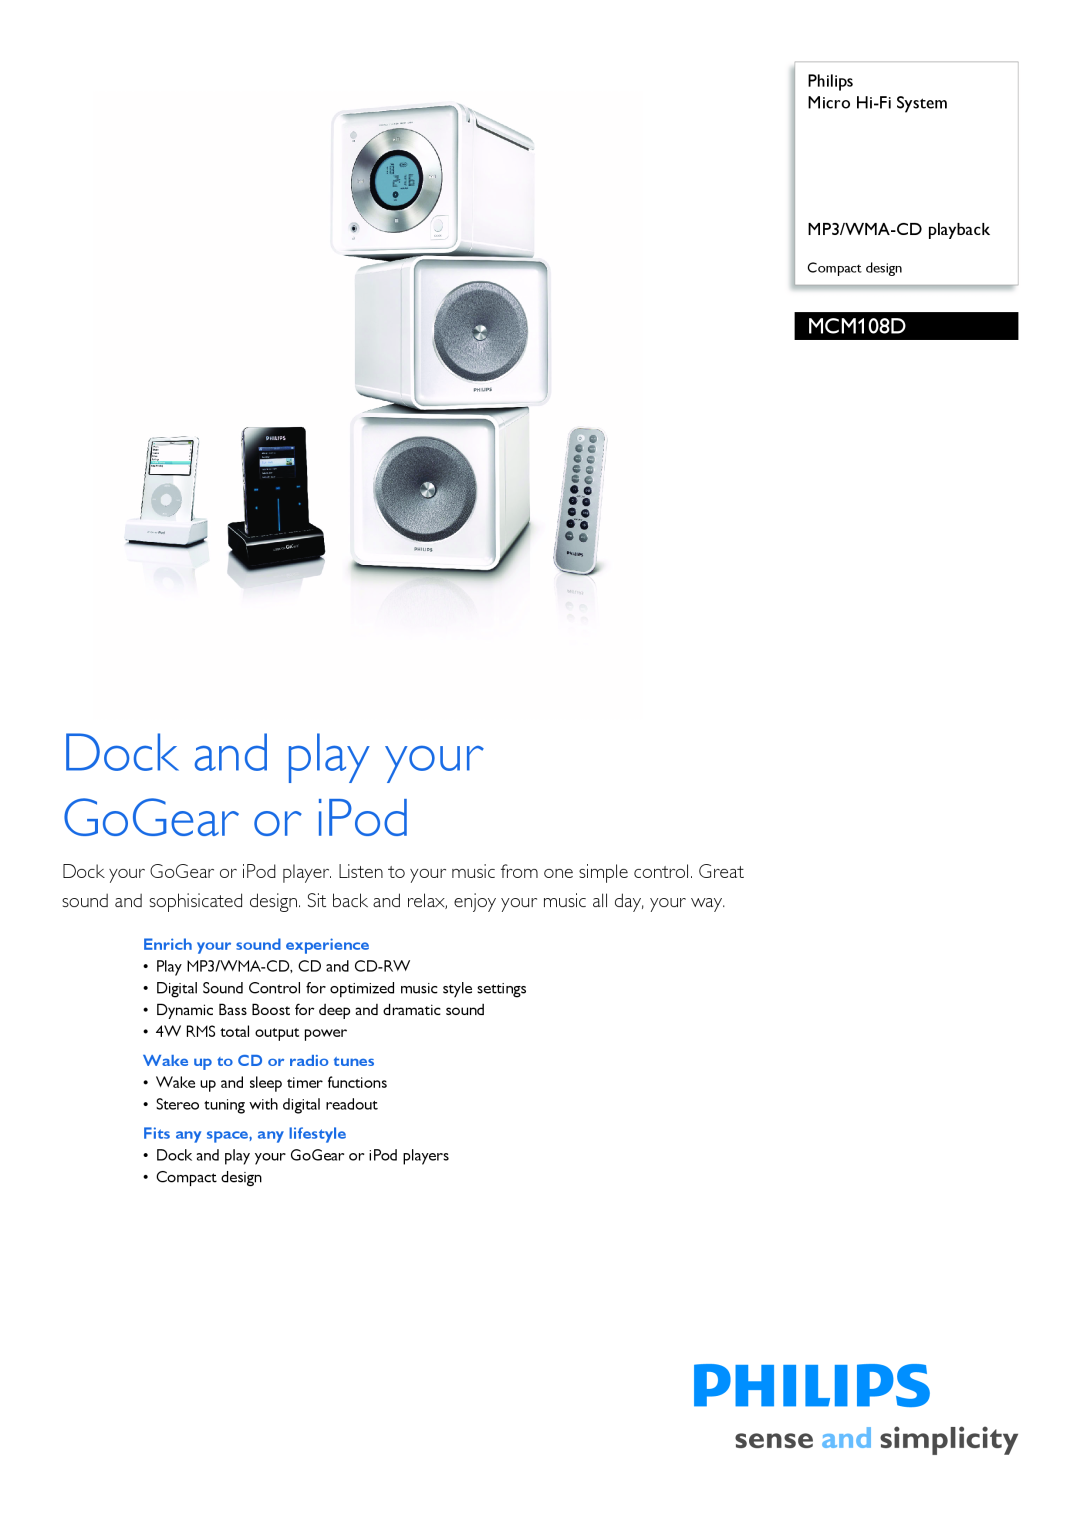 Philips MCM108D manual Dock and play your GoGear or iPod 